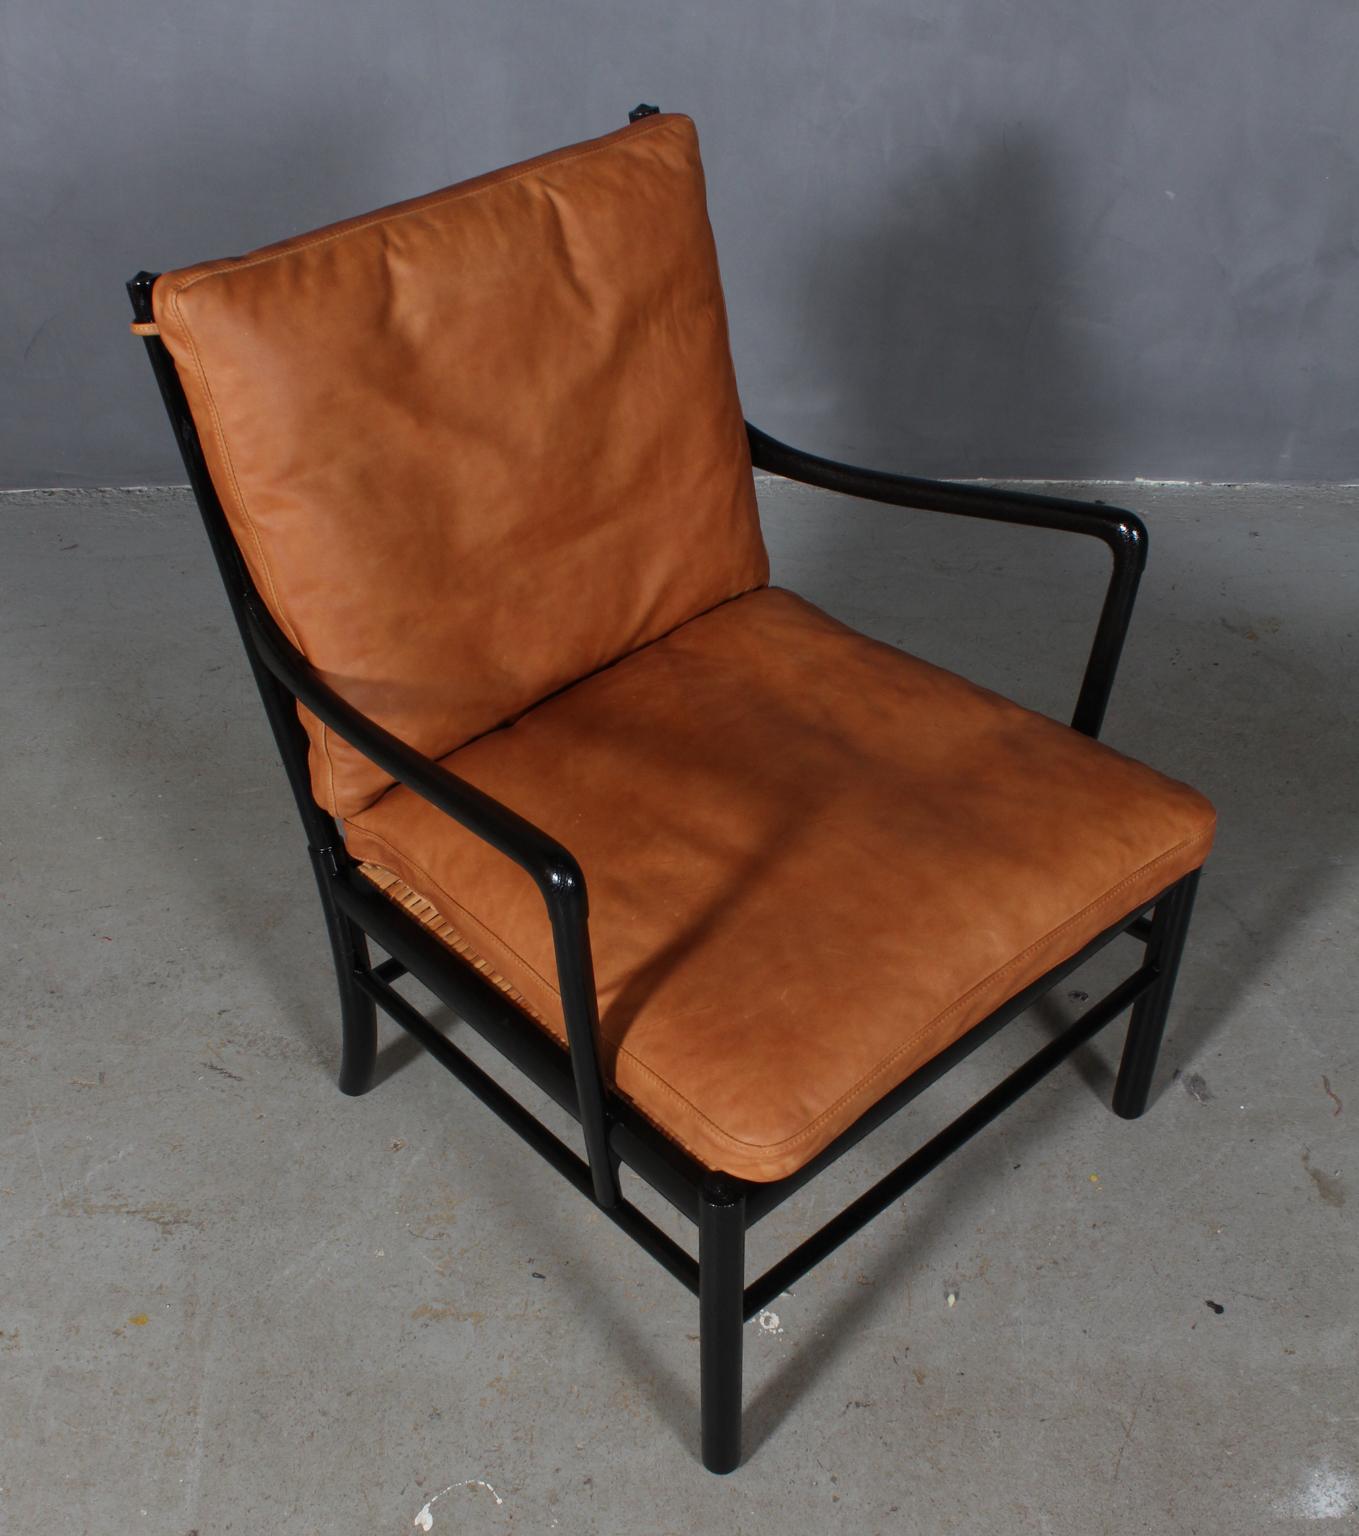 Ole Wanscher lounge chair new upholstered with cognac vintage aniline leather.

Made in new black laquered oak. 

Model colonial chair, made by Poul Jeppesen.